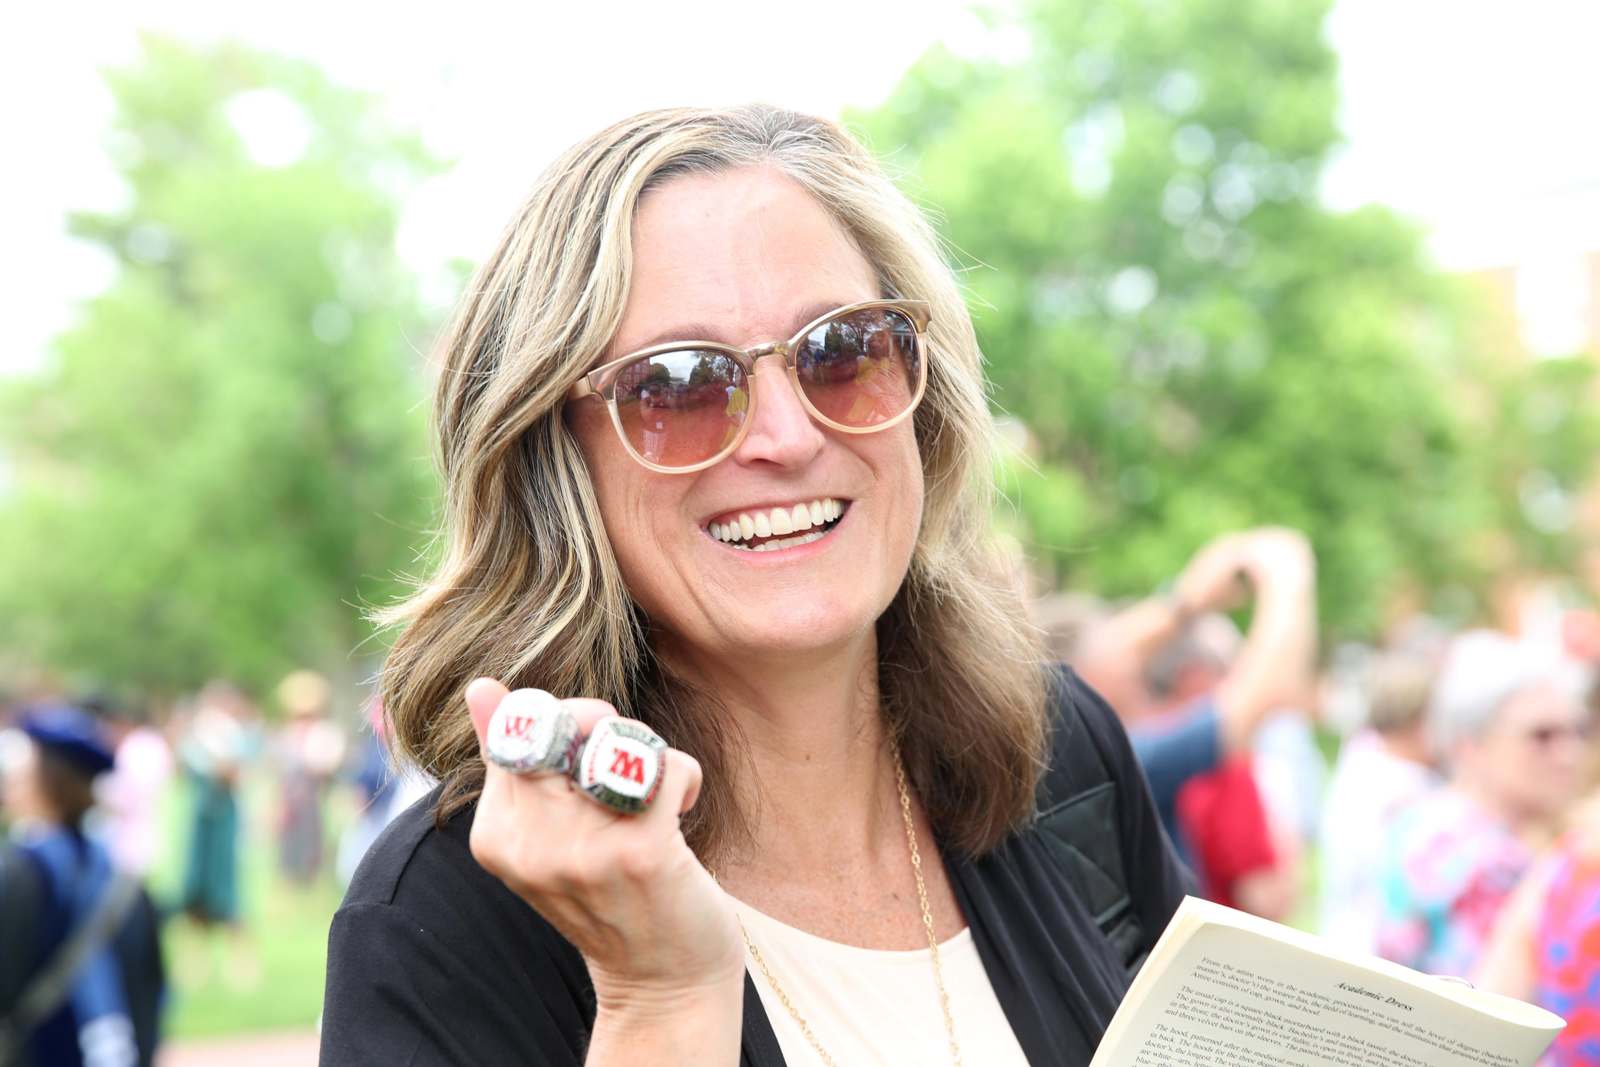 a woman wearing sunglasses and holding two rings